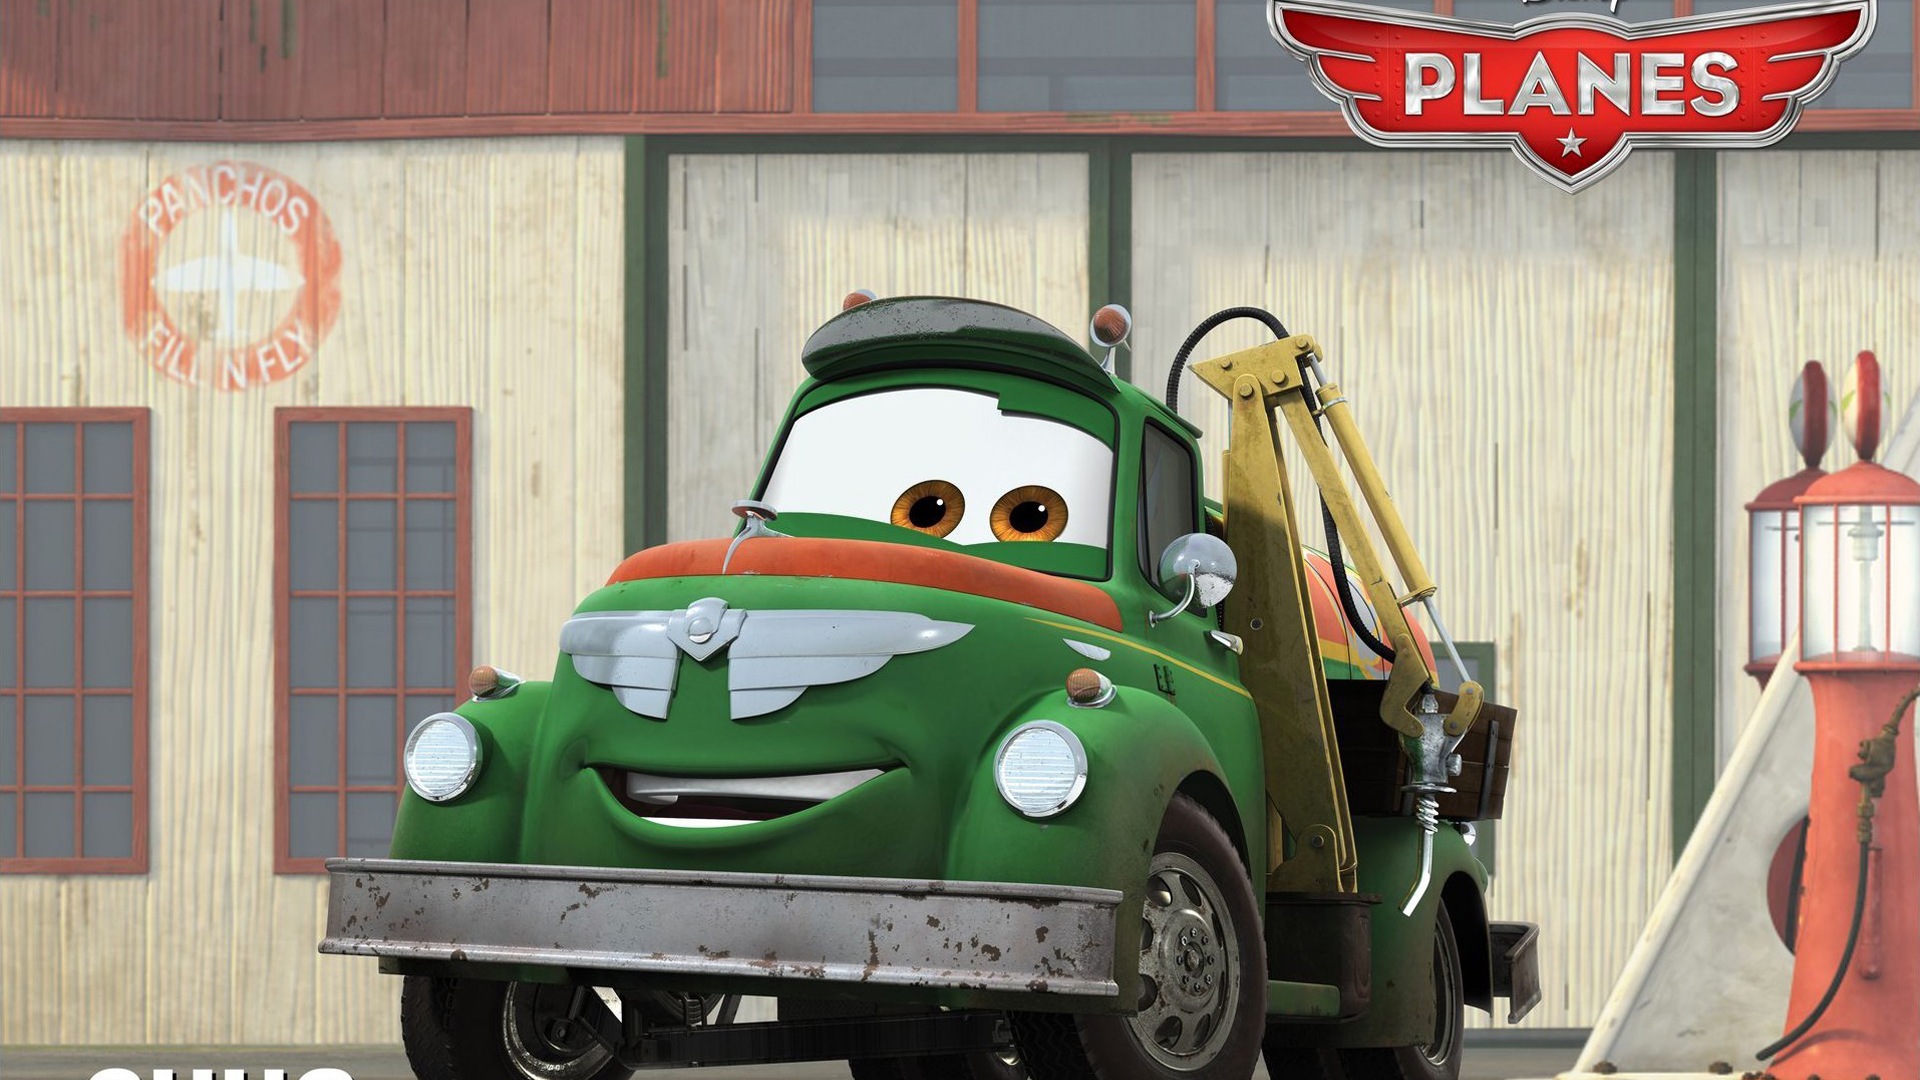 Planes 2013 HD wallpapers #10 - 1920x1080